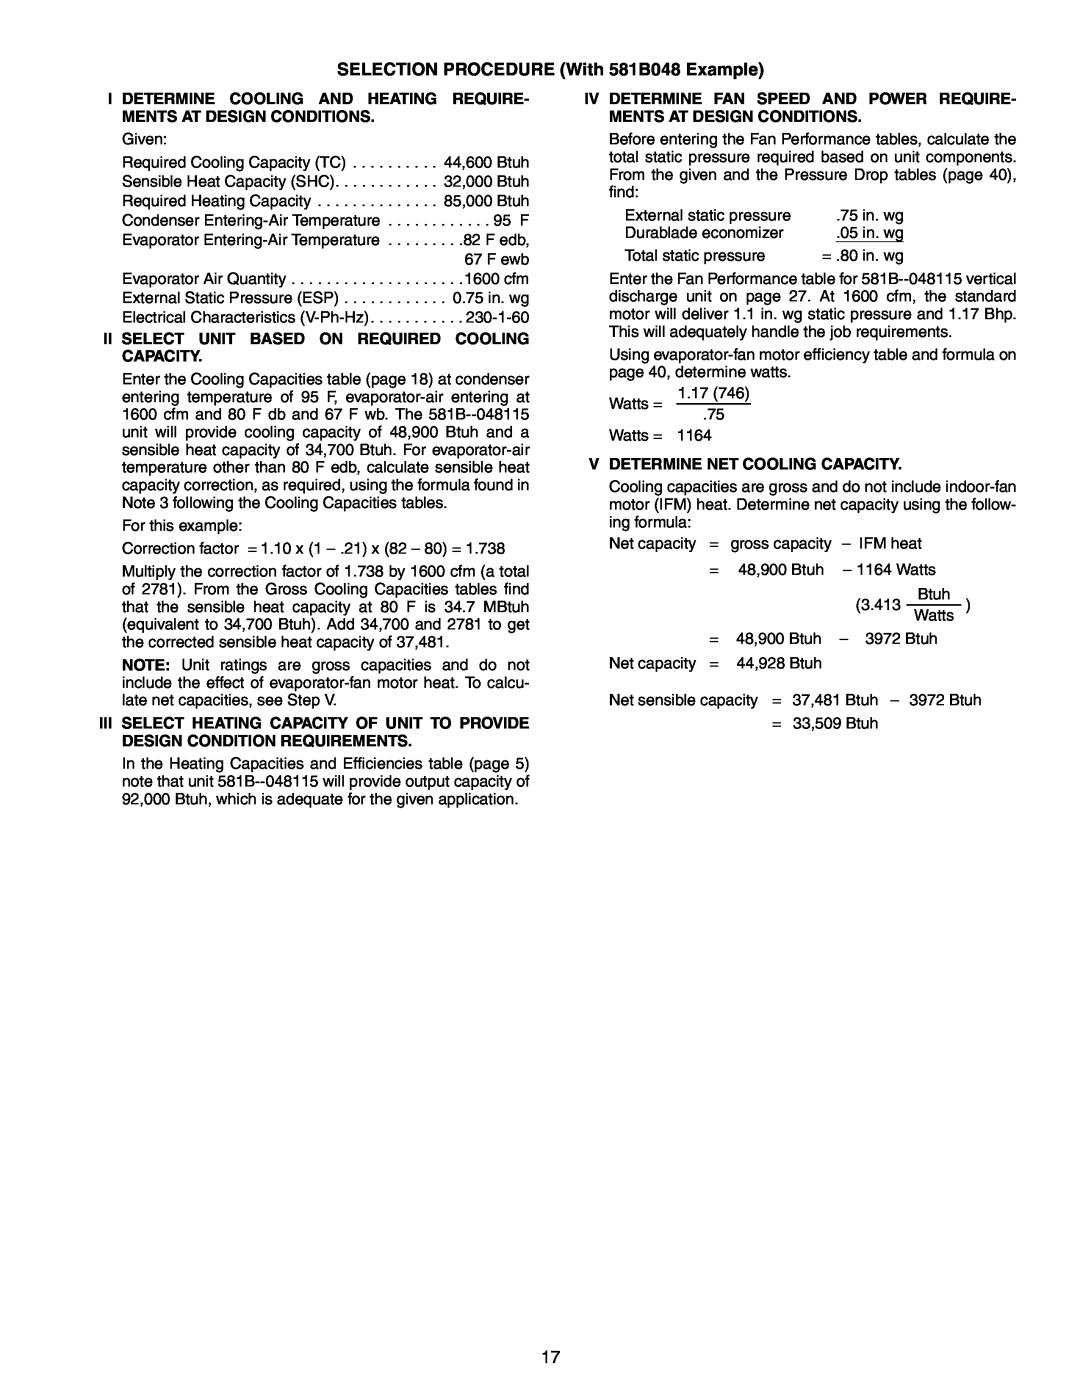 Bryant manual SELECTION PROCEDURE With 581B048 Example 